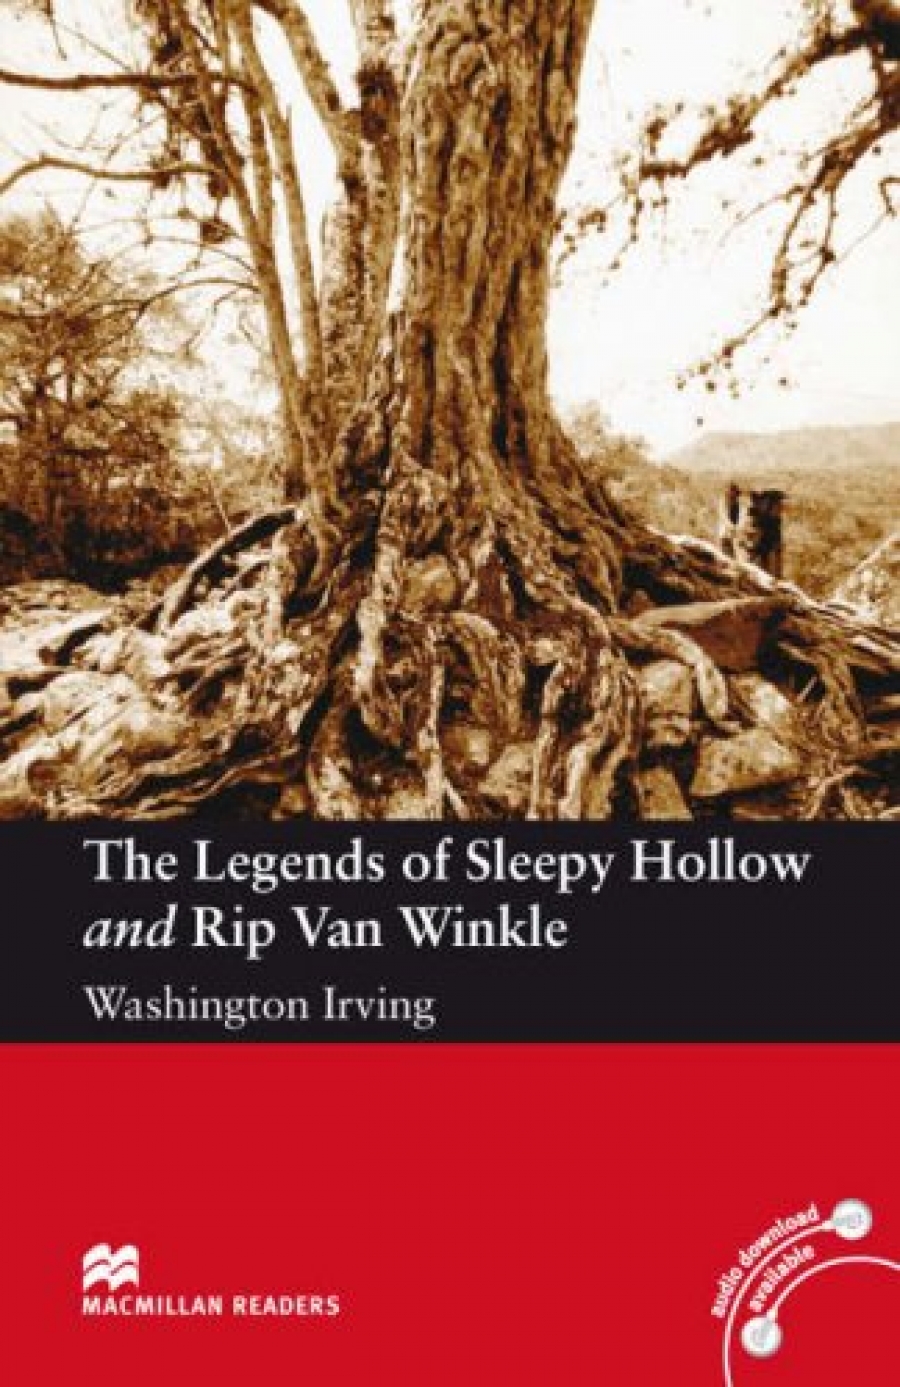 Washington Irving, retold by Anne Collins The Legends of Sleepy Hollow and Rip Van Winkle 